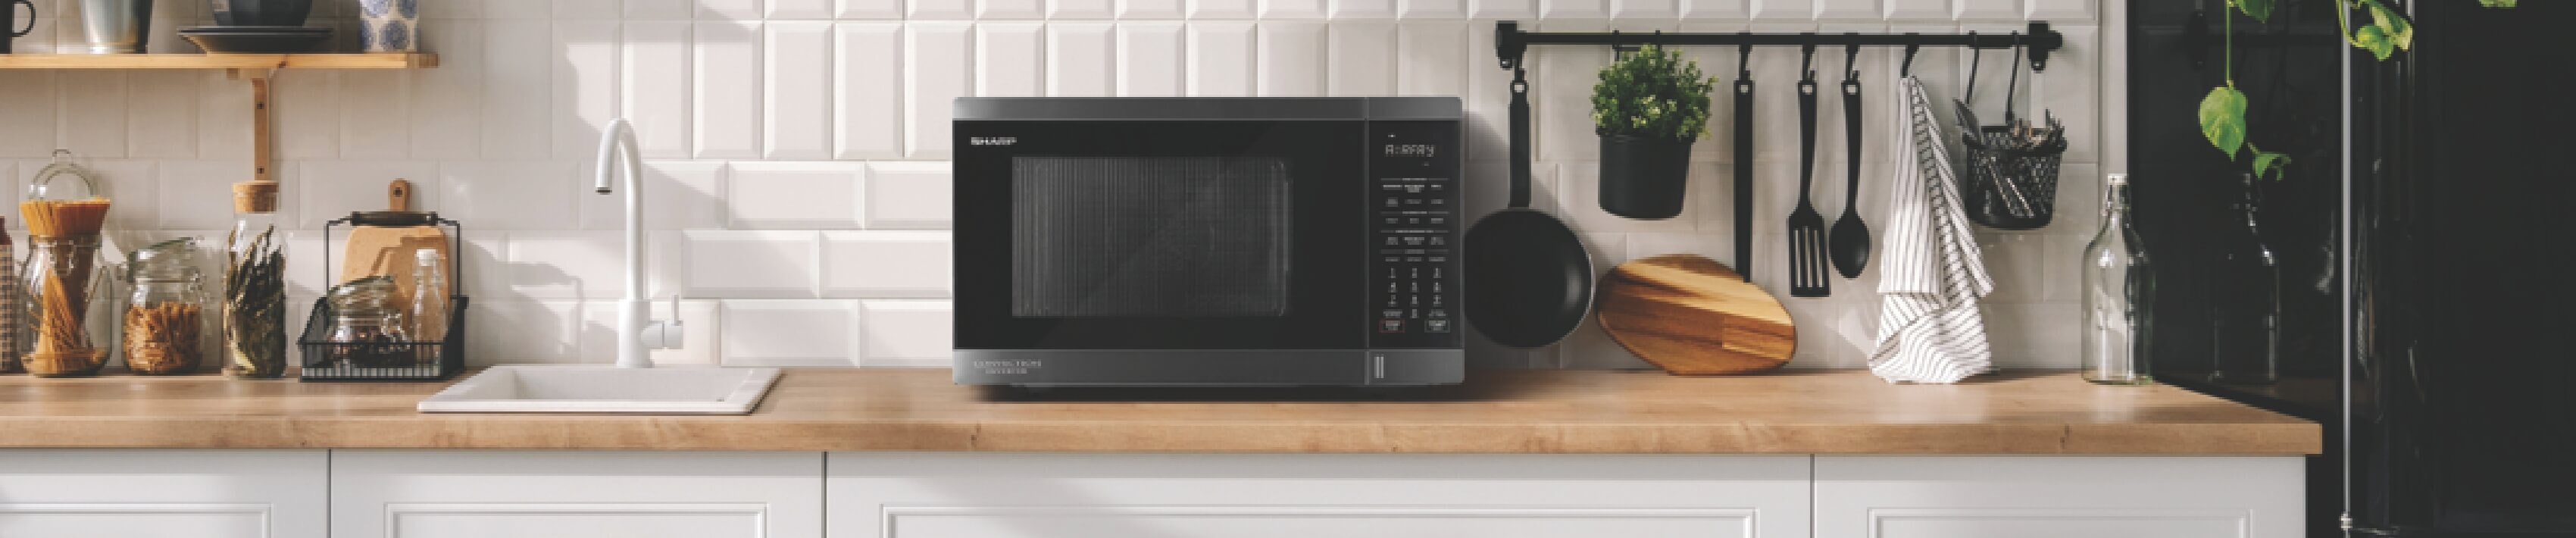 Black microwave on a wooden benchtop